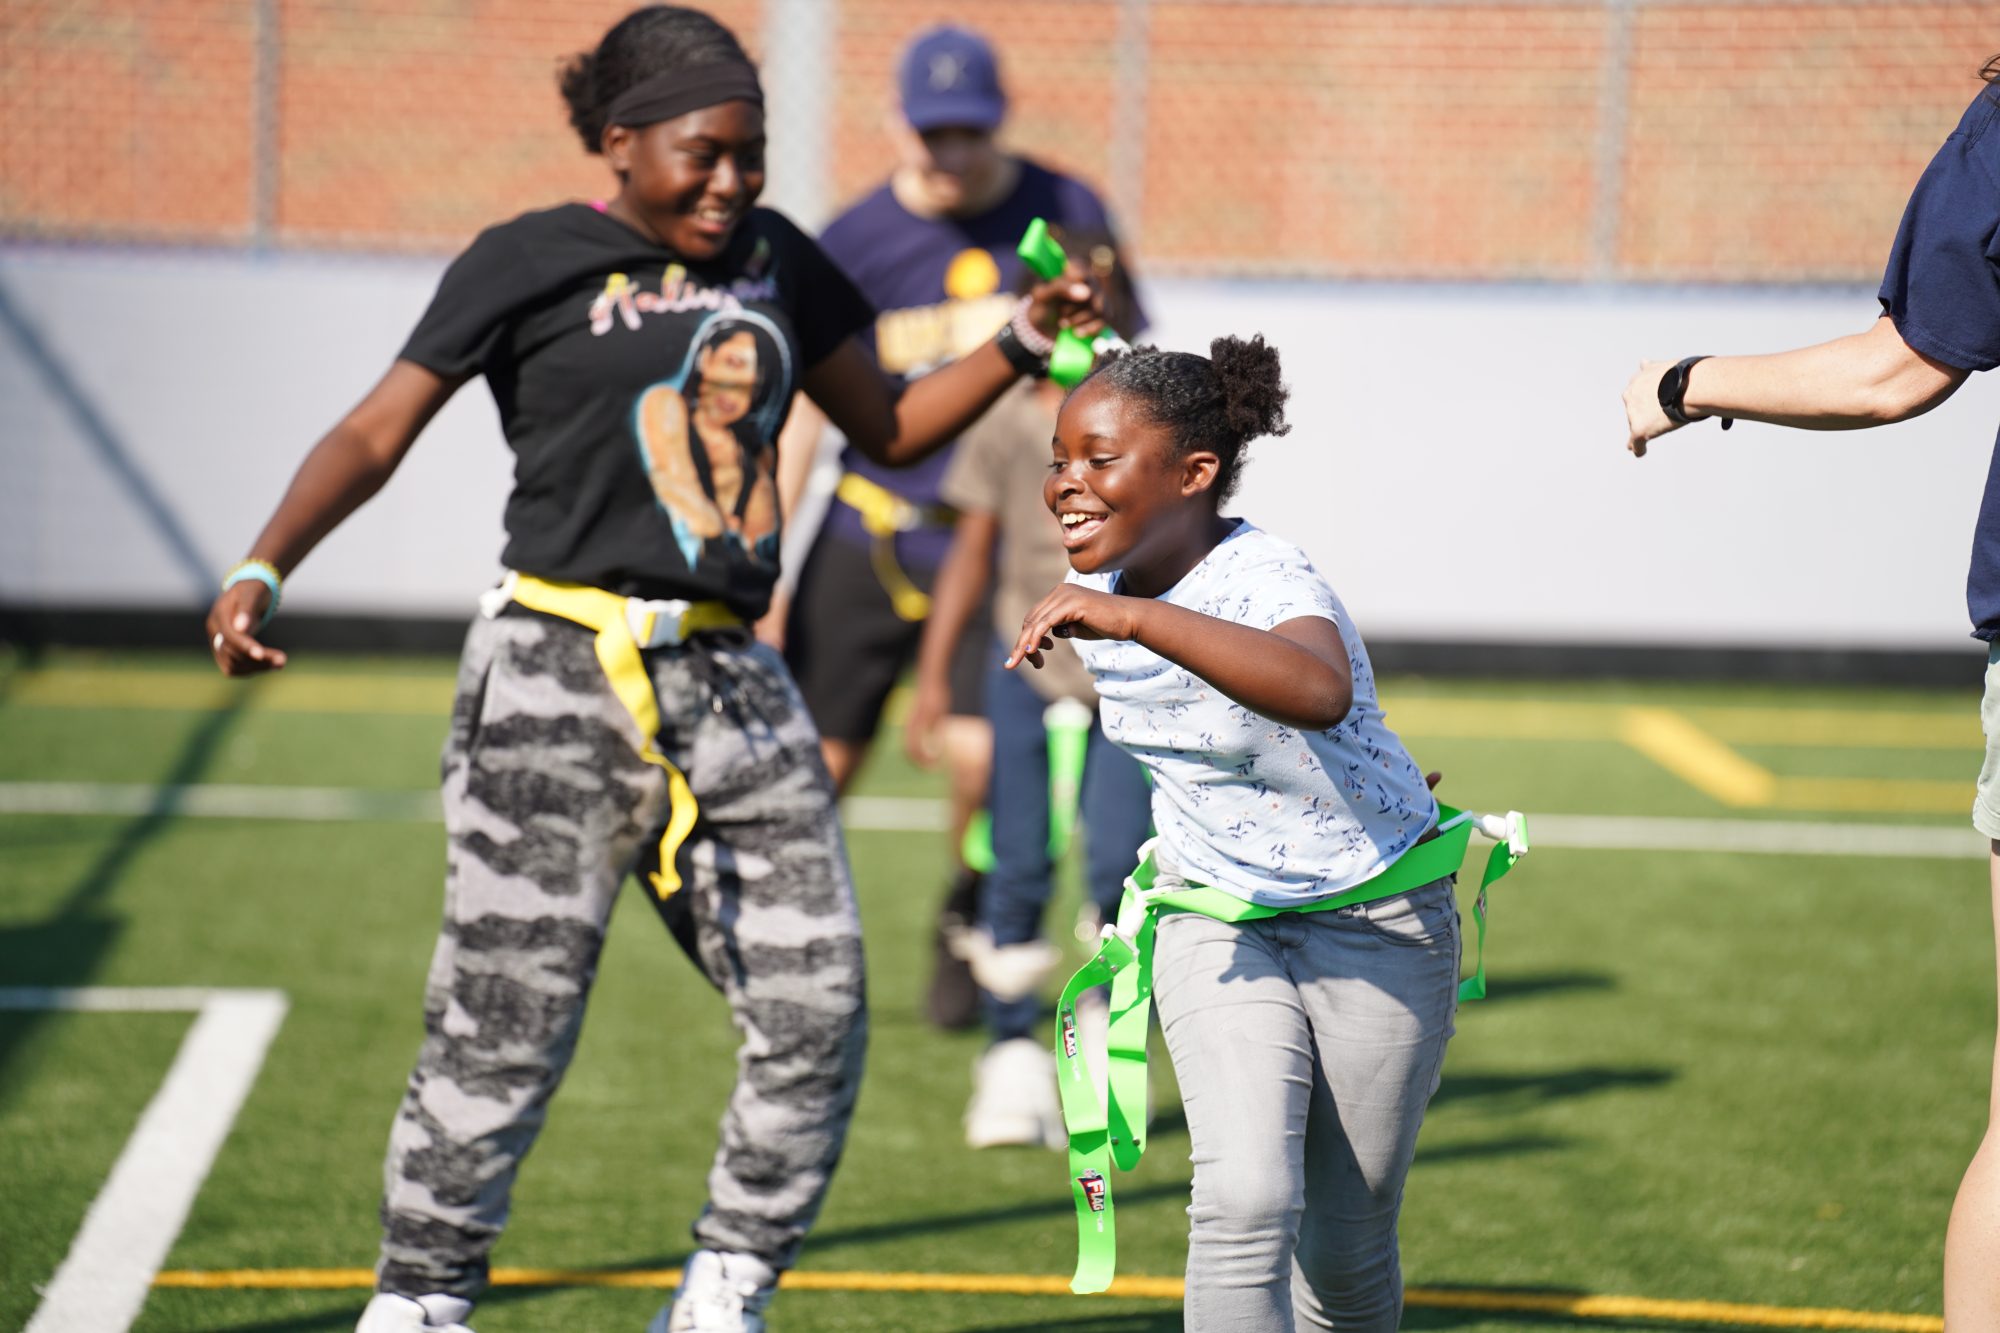 Two students enjoying a game of flag tag.